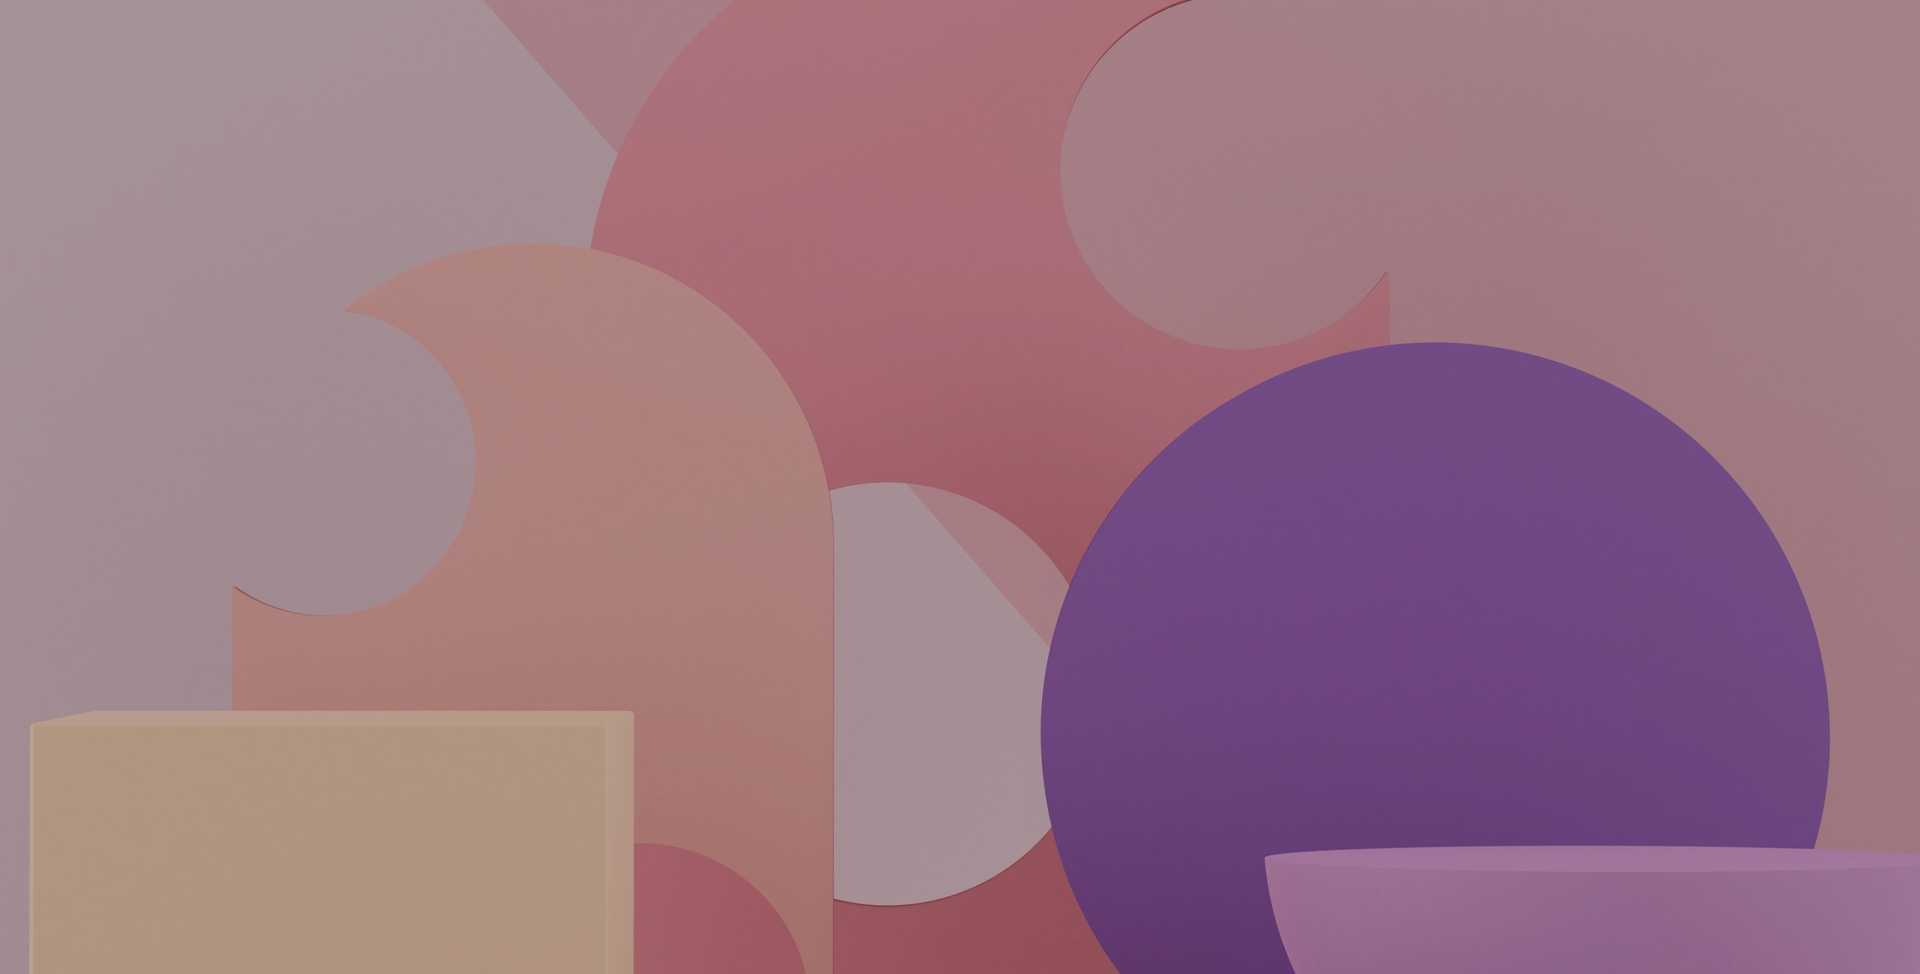 Abstract rendering of diverse circular and angular shapes in shades of pink and purple representing different time management techniques